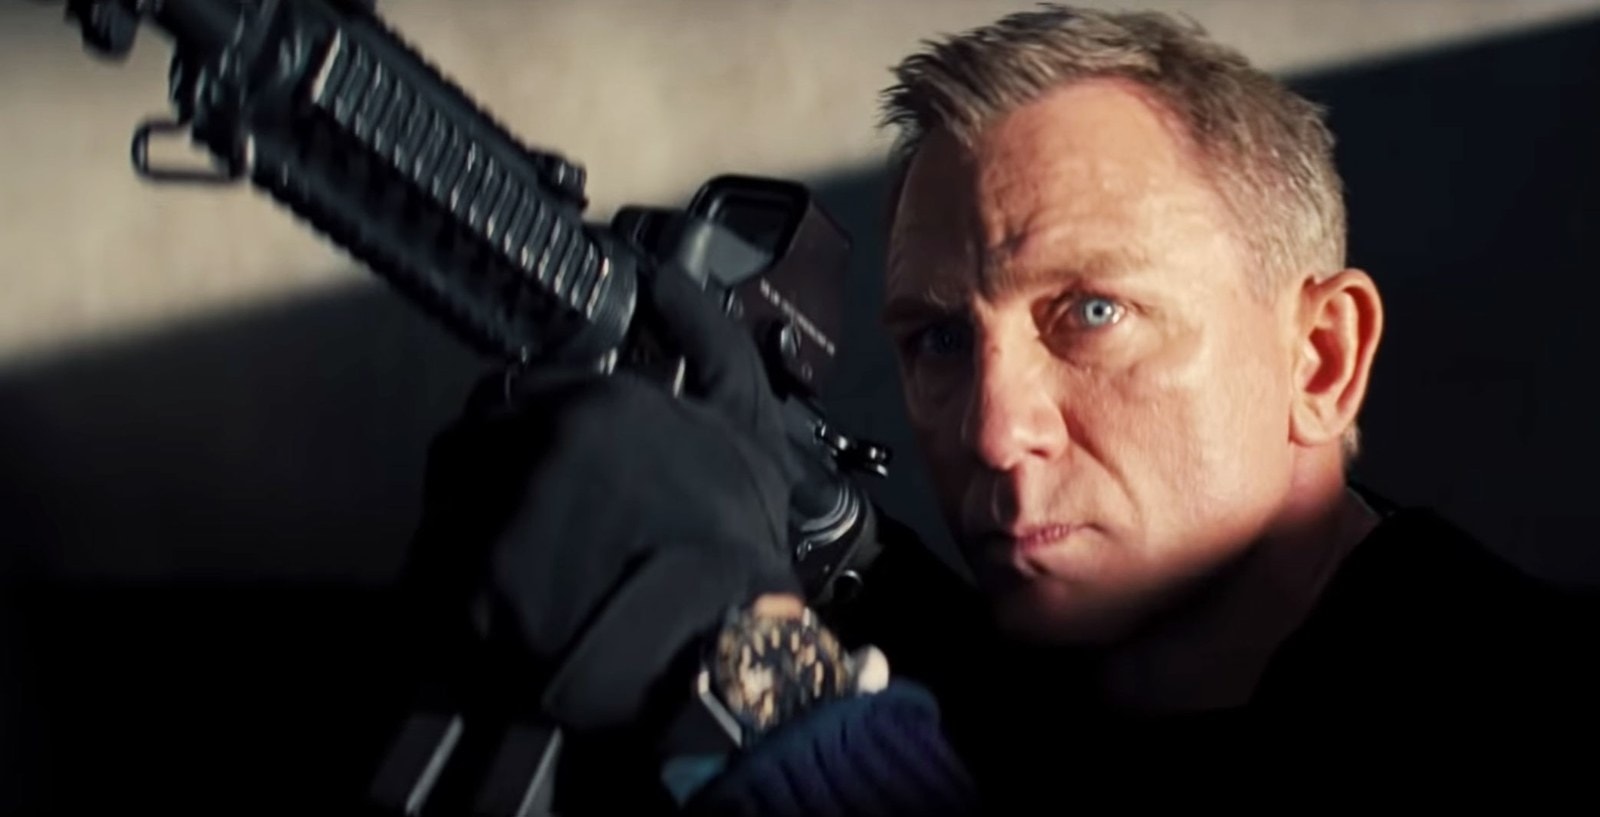 https://s1.cdn.autoevolution.com/images/news/daniel-craig-helped-design-the-omega-watch-james-bond-wears-in-no-time-to-die-139611_1.jpg